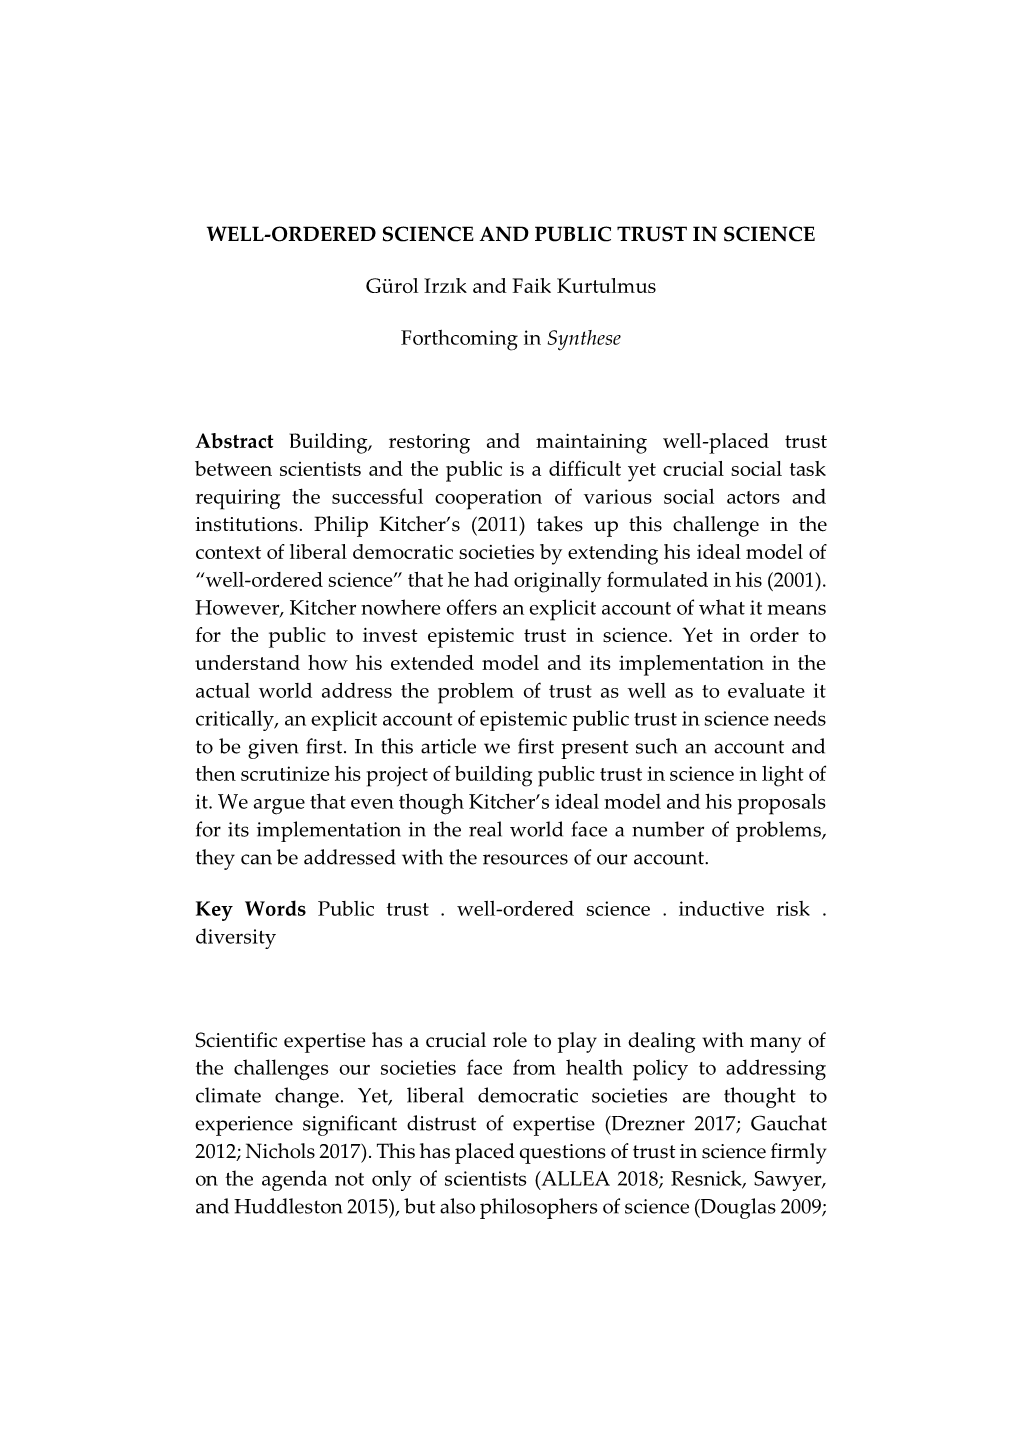 Reliability of Research, Public Trust in Science, and Well-Ordered Science